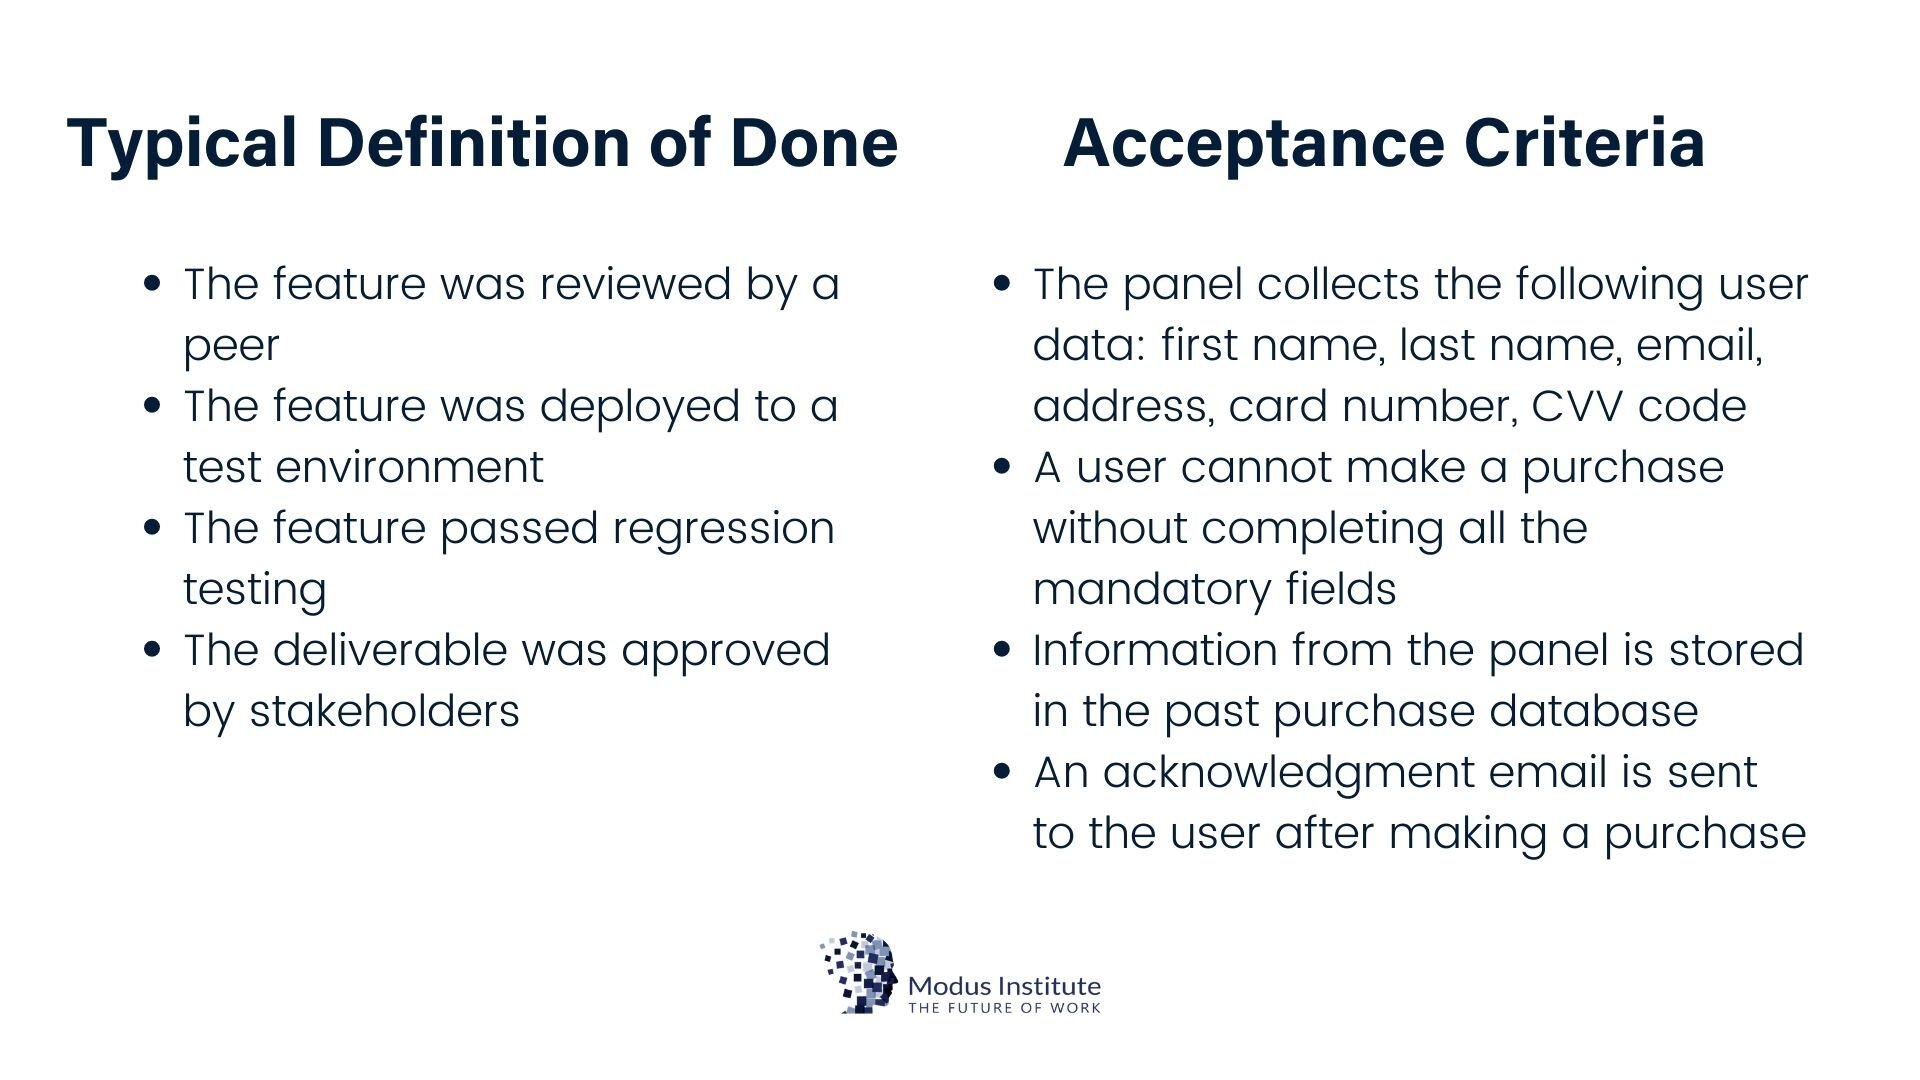 V definition. Definition of done. Acceptance Criteria примеры. Acceptance Criteria и dod. Definition of done example.